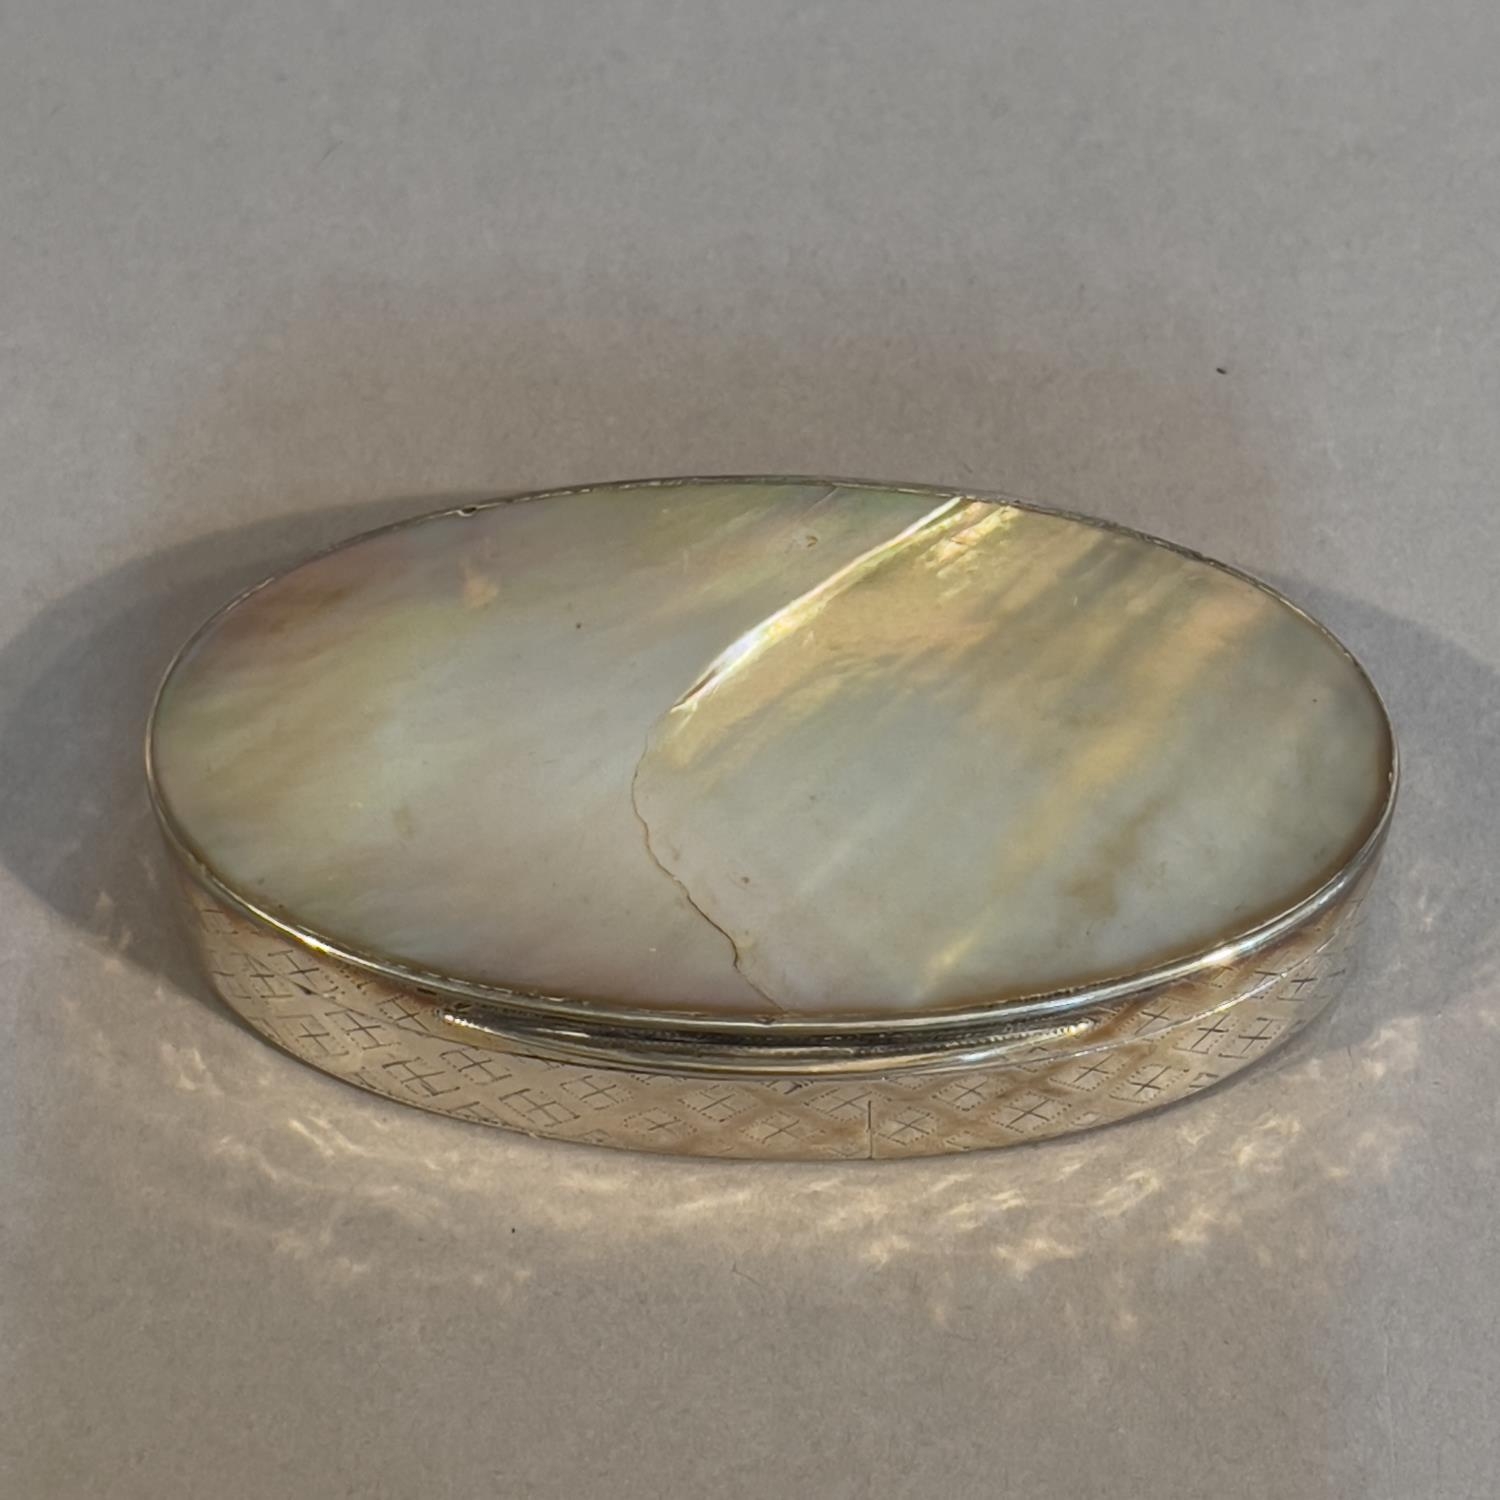 A late 19th century silver and mother of pearl; snuff box, oval, the sides embossed with a trellis